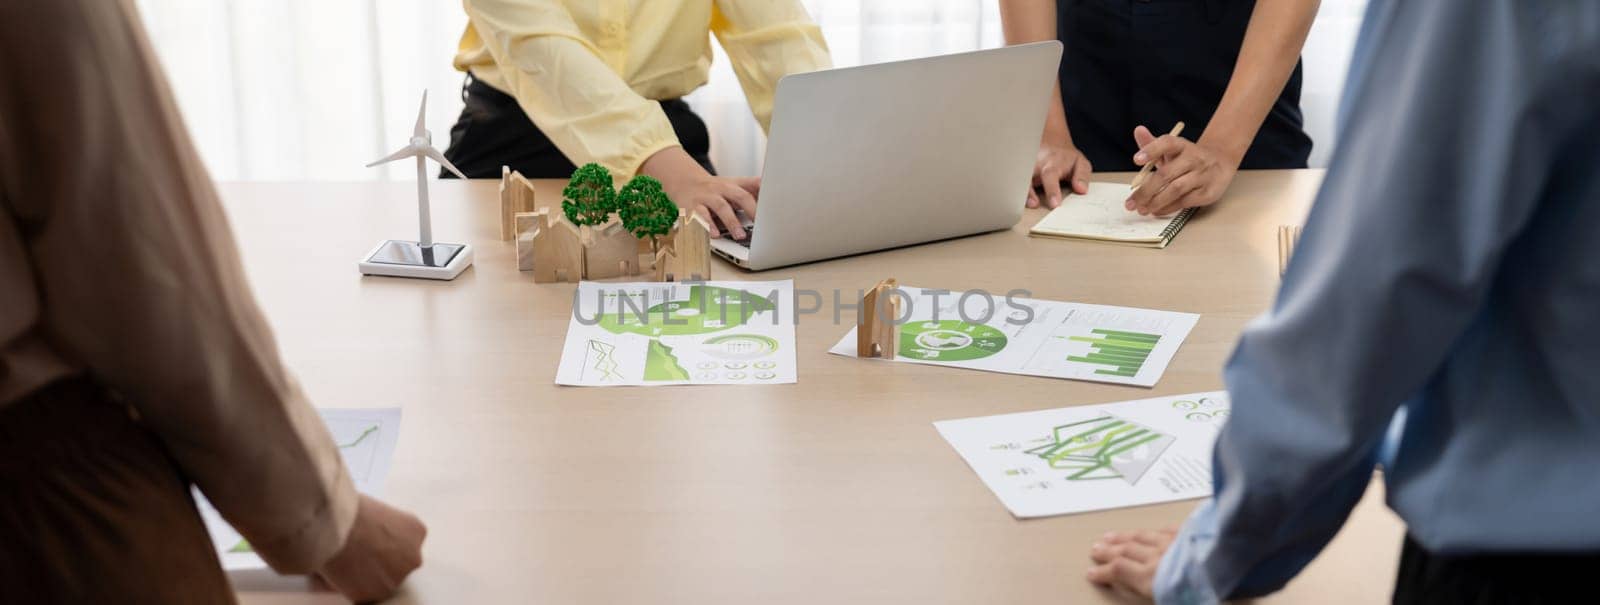 Wooden block represented green city and wind mill represented renewable energy was placed at center of green business meeting table with environmental document. Green business concept. Delineation.